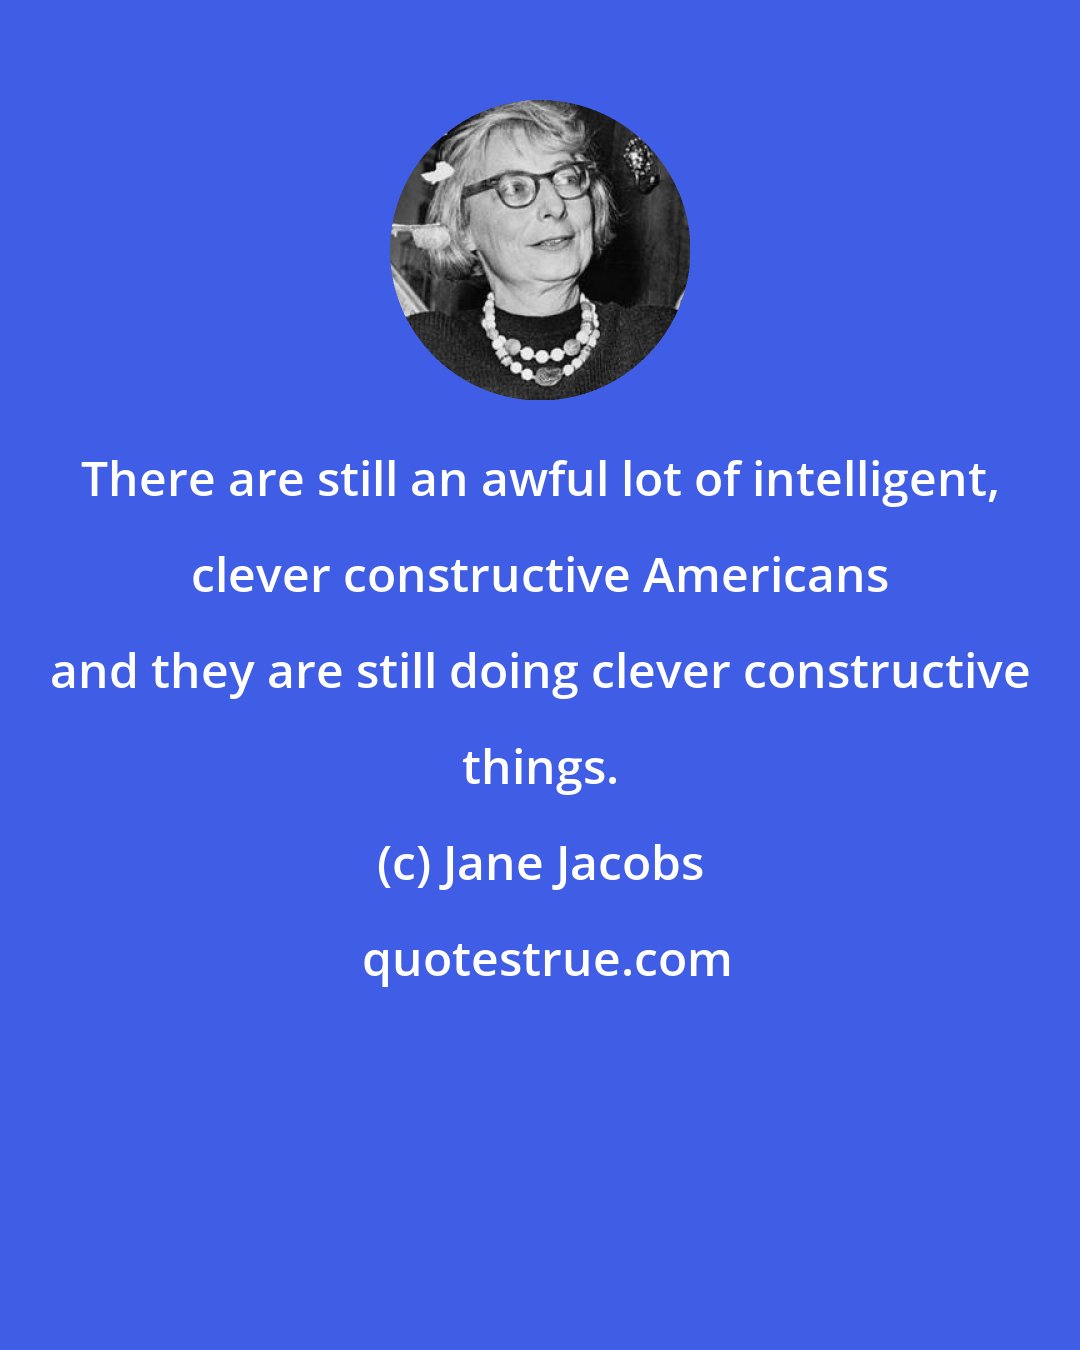 Jane Jacobs: There are still an awful lot of intelligent, clever constructive Americans and they are still doing clever constructive things.